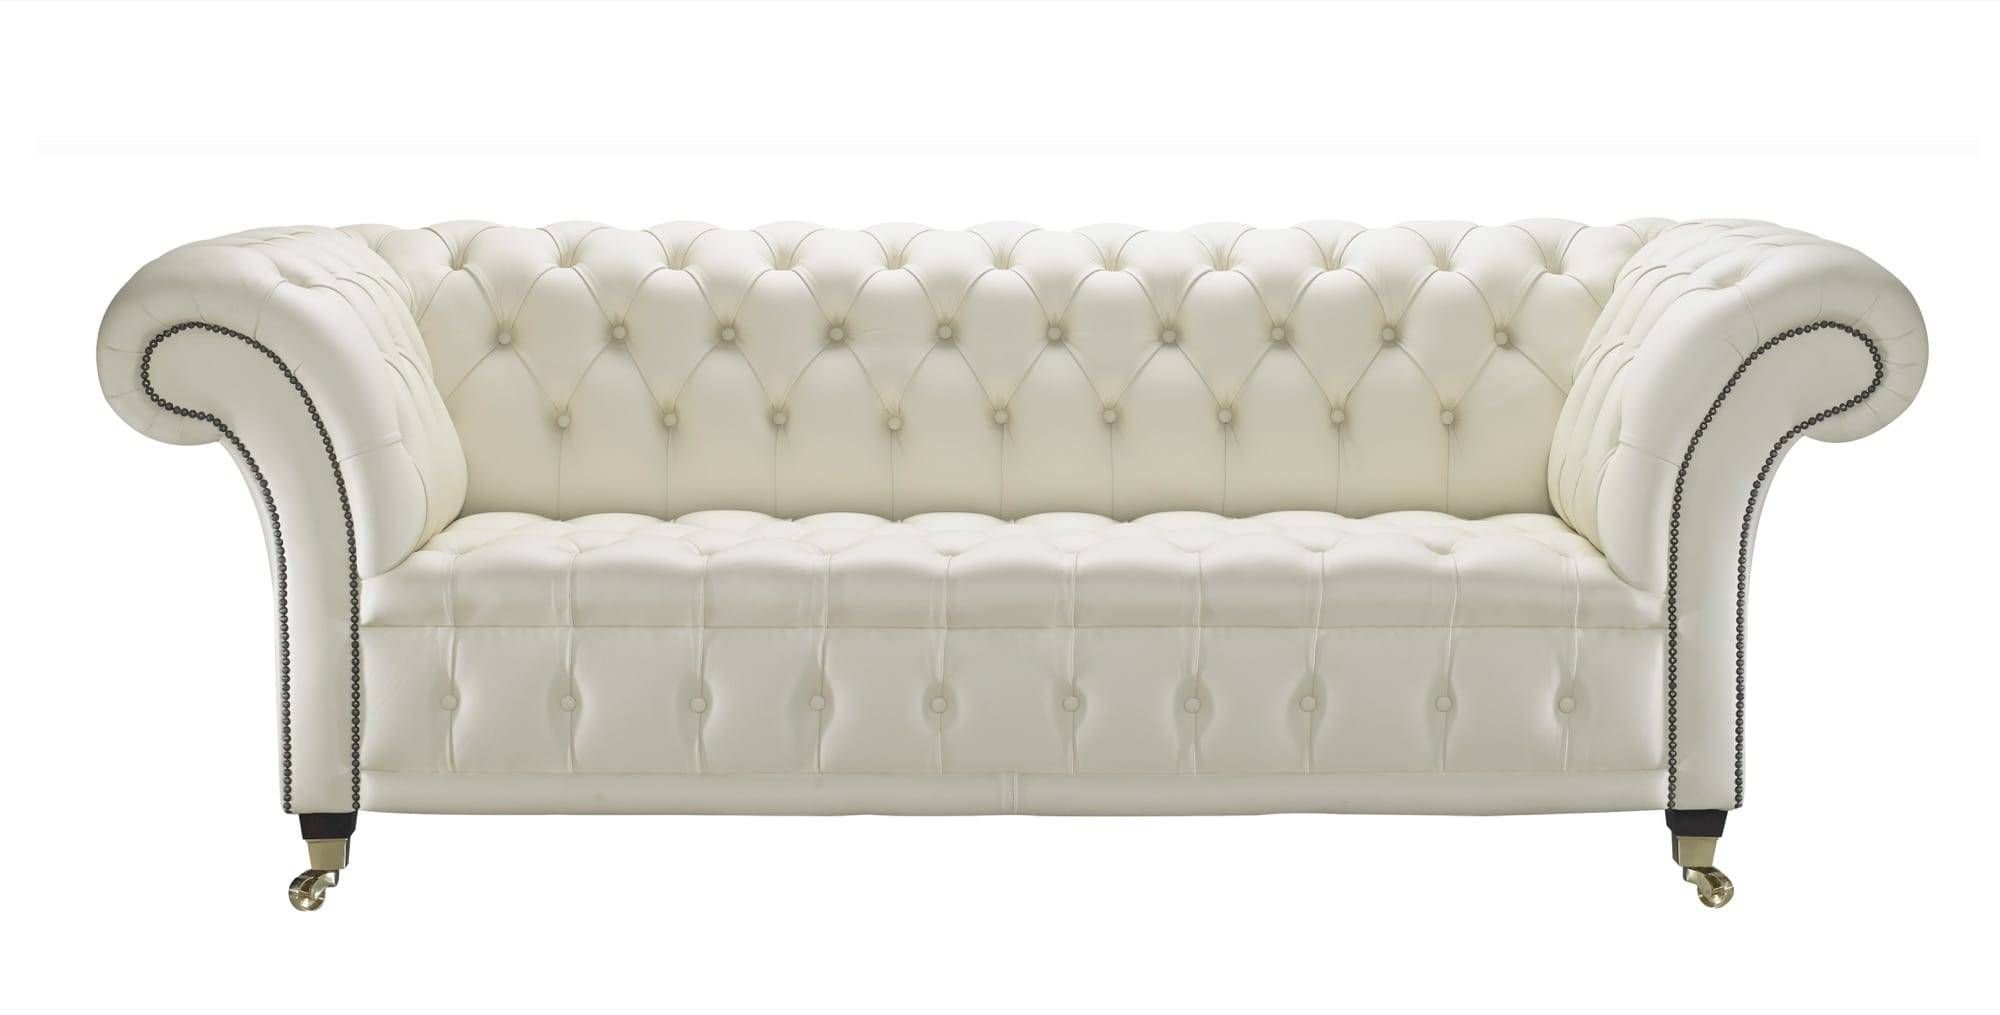 Cream Leather Chesterfield Sofa, Handcrafted In The Uk In Leather Chesterfield Sofas (View 28 of 30)